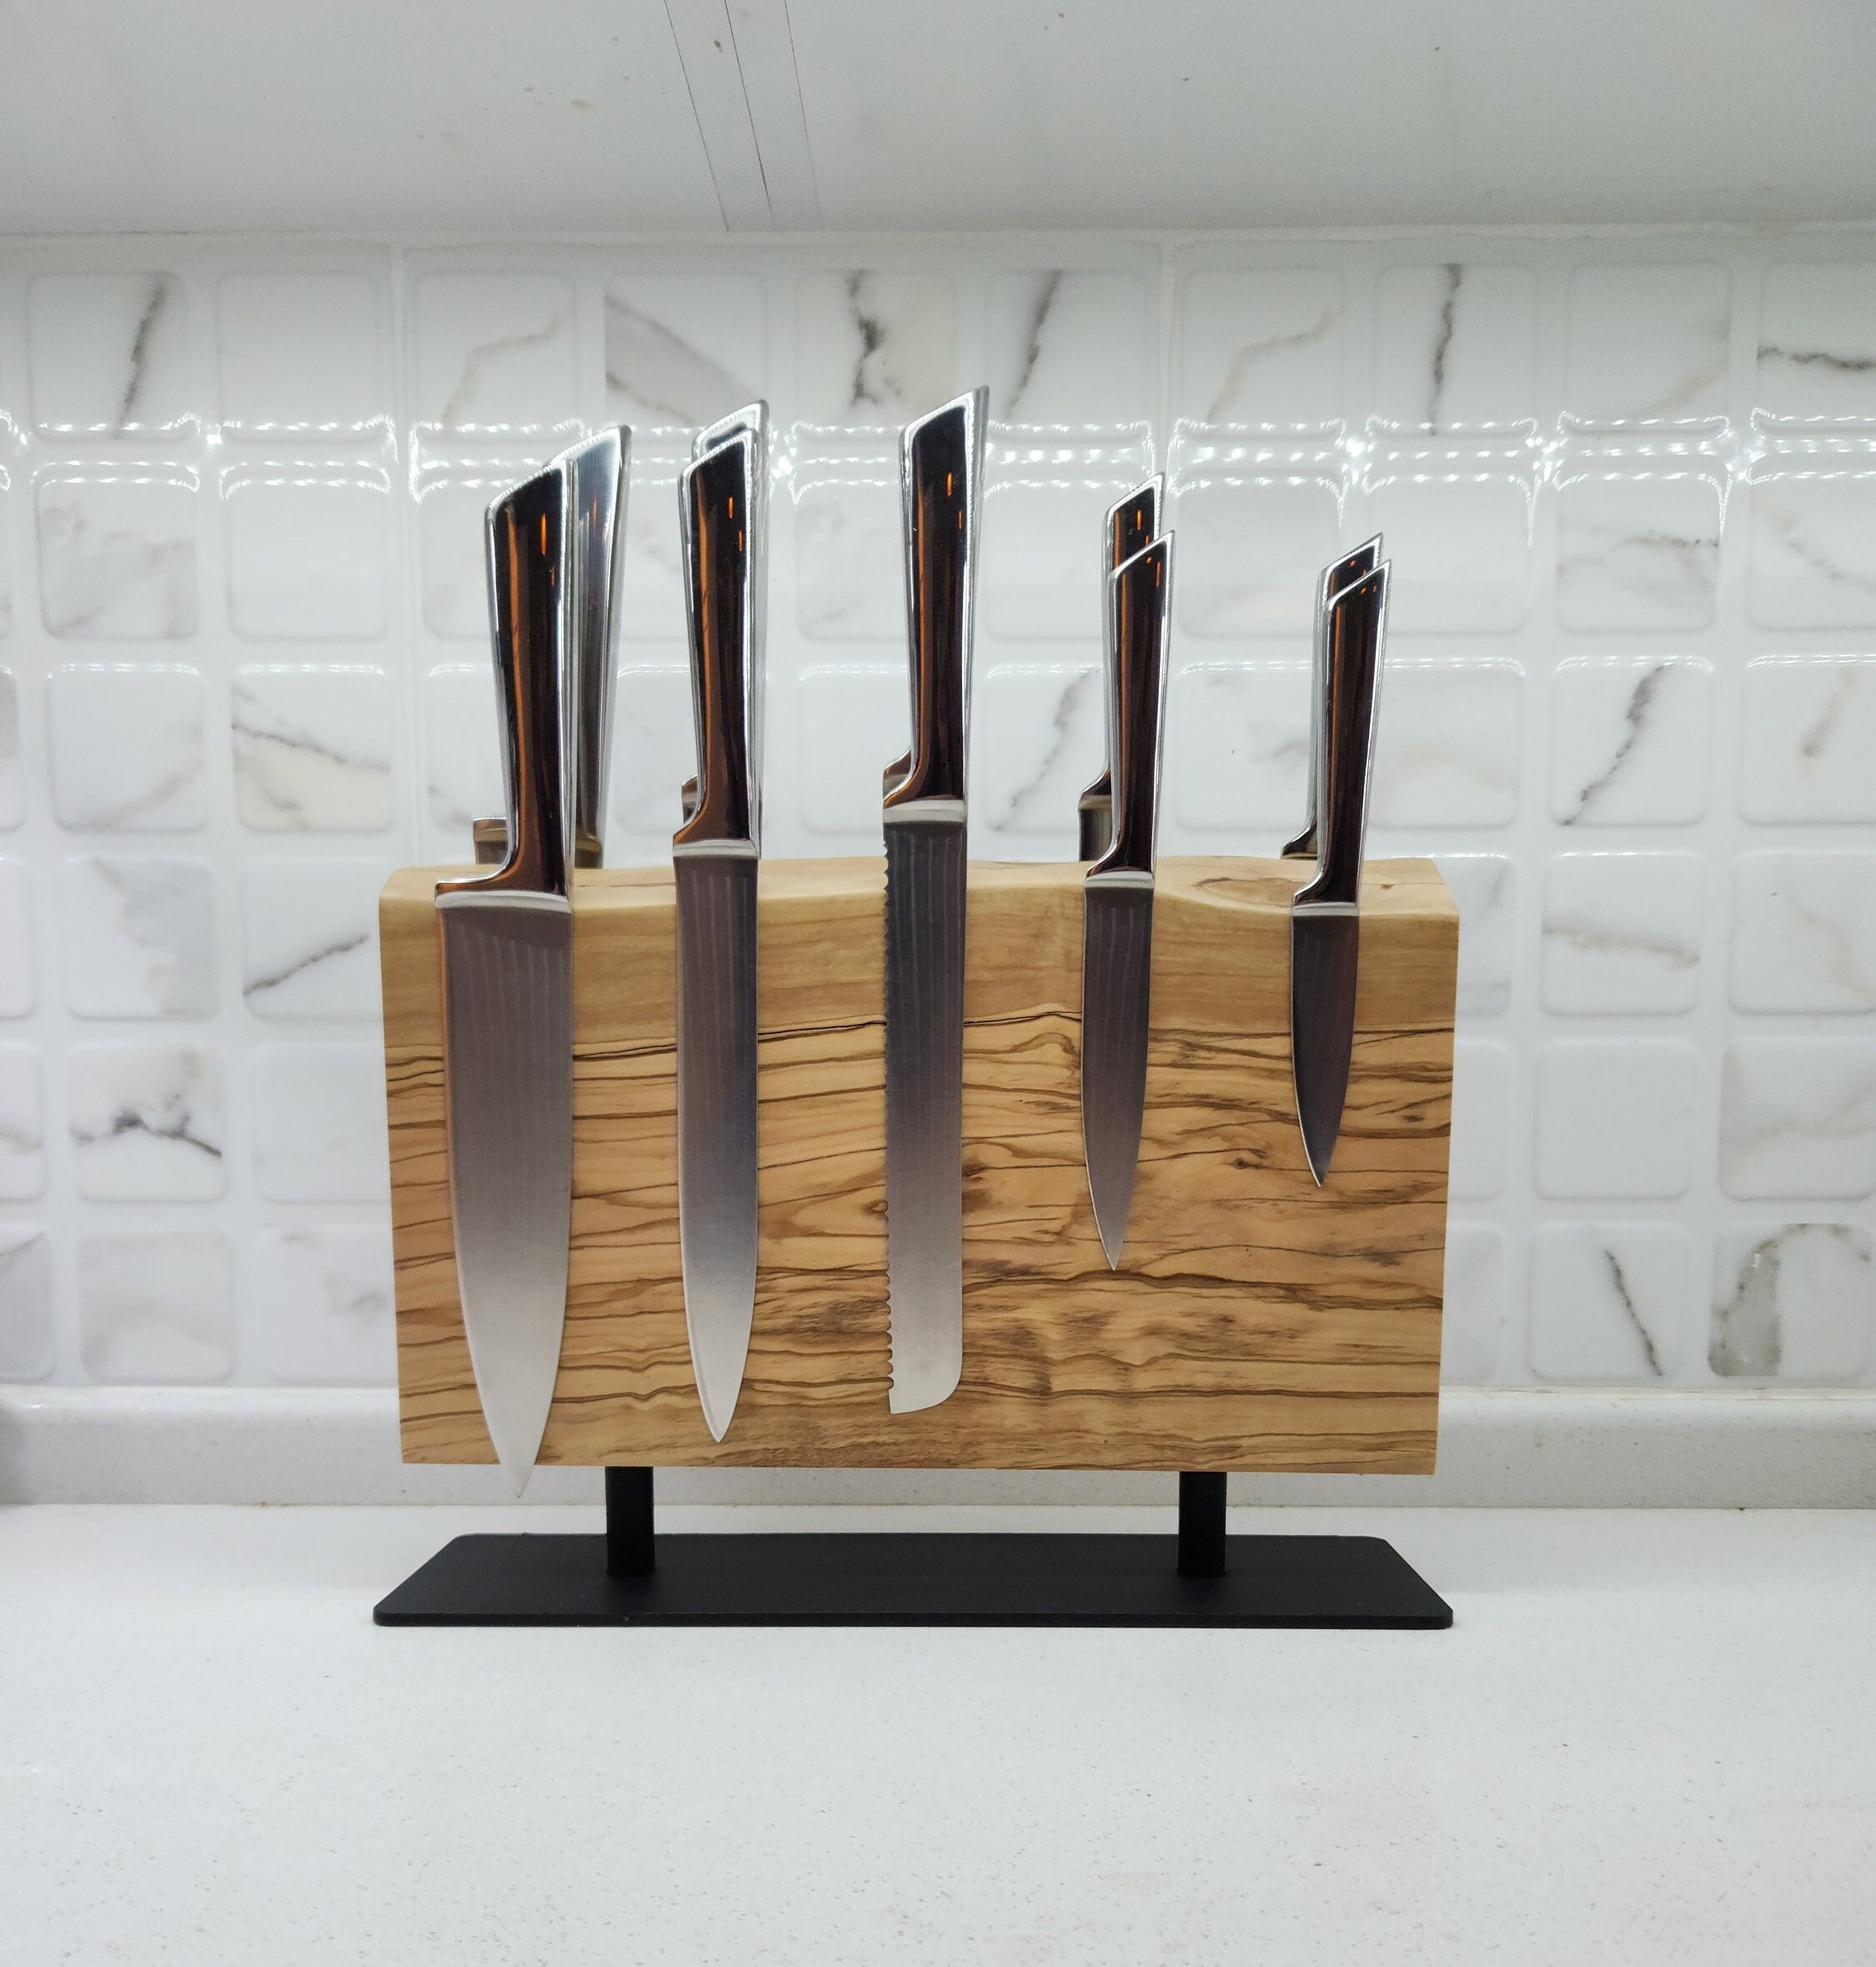 Wood Knife Rack Wall Mount Knife Holder Wooden Knife Block Rustic Kitchen  Wall Decor Gift for Cooks 